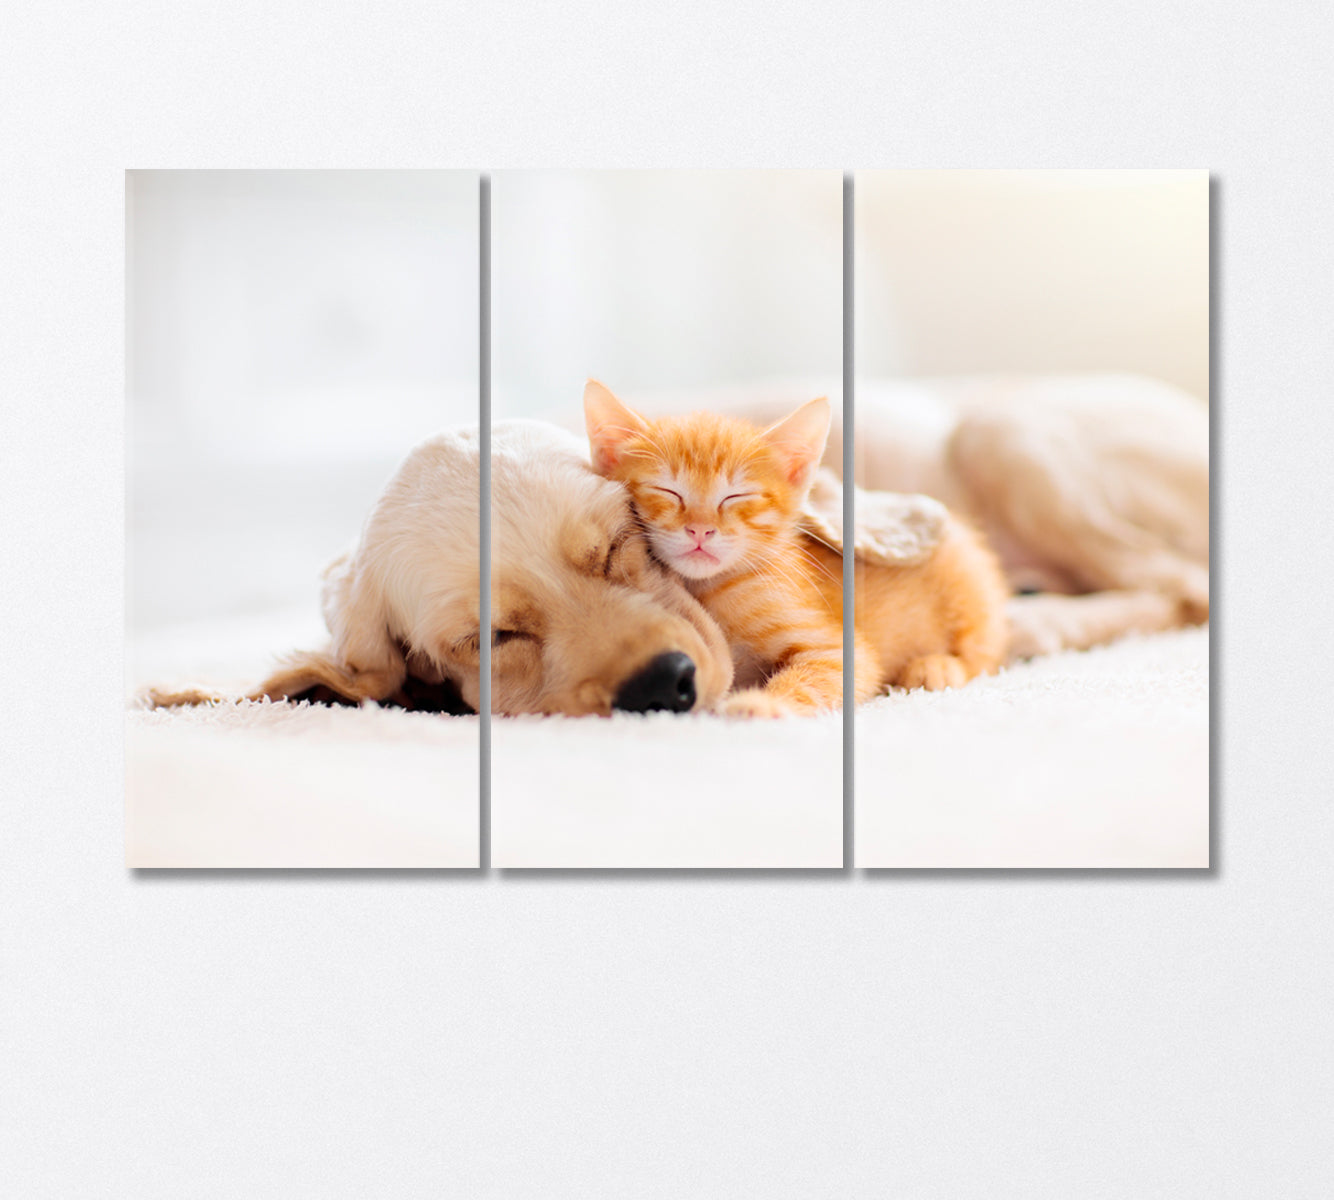 Cat and Puppy Sleeping Together Canvas Print-Canvas Print-CetArt-3 Panels-36x24 inches-CetArt